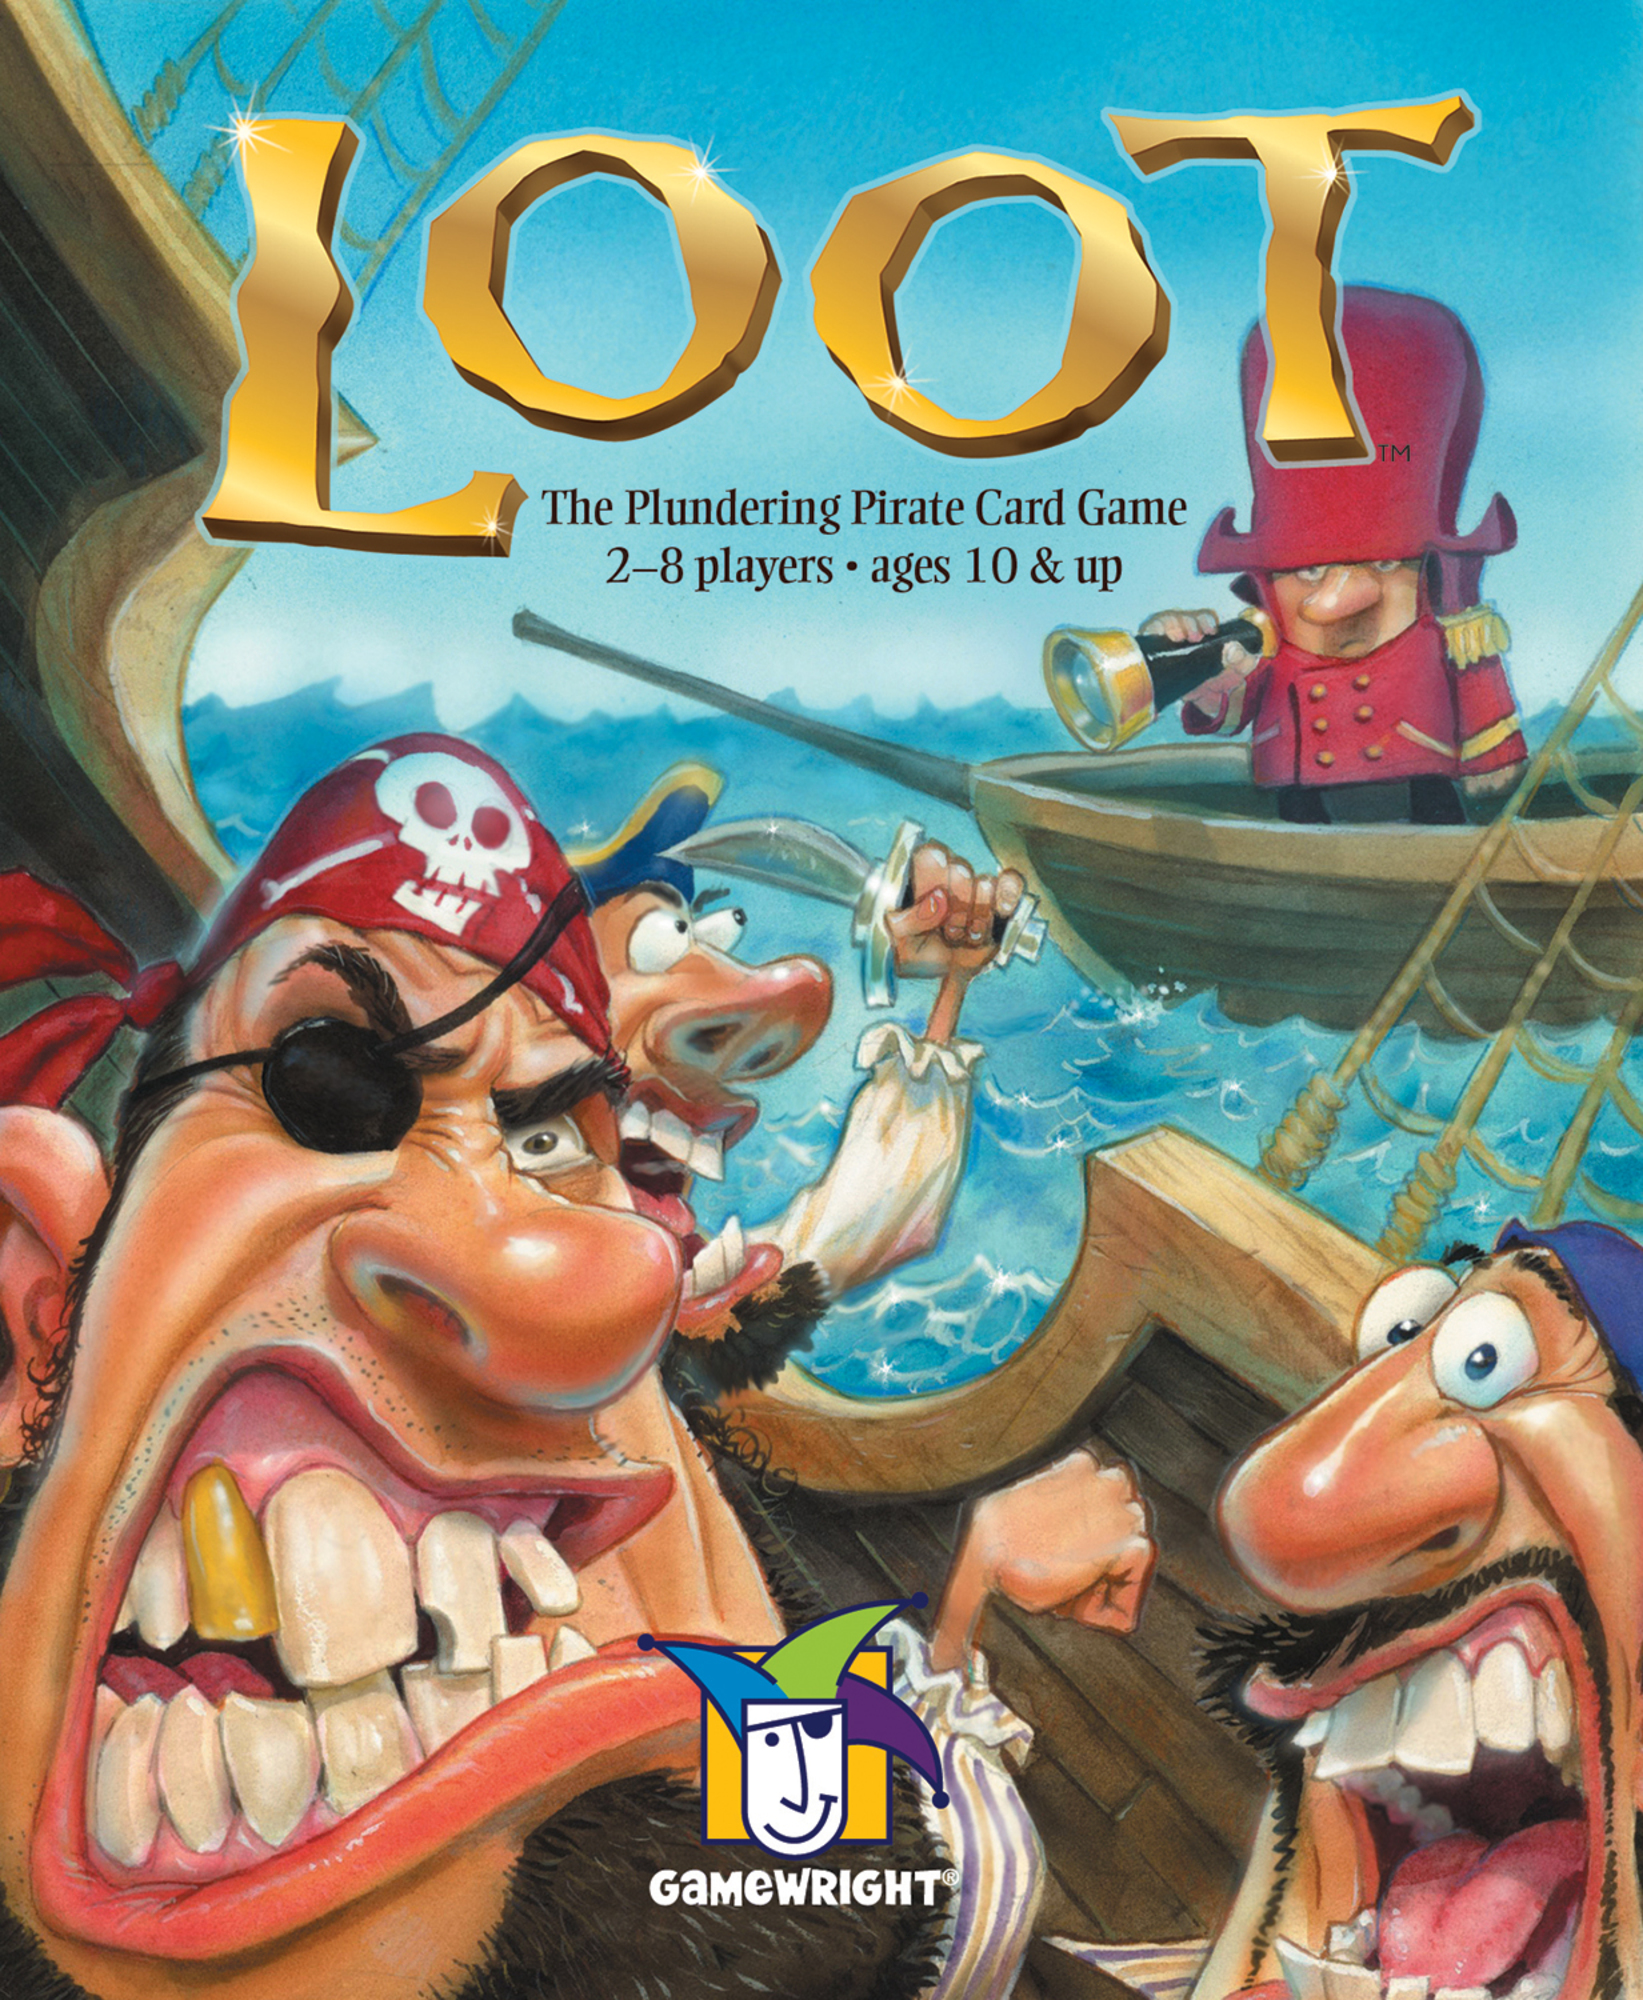 Loot The Plundering Pirate Card Game by Gamewright 0759751002312 for sale online 